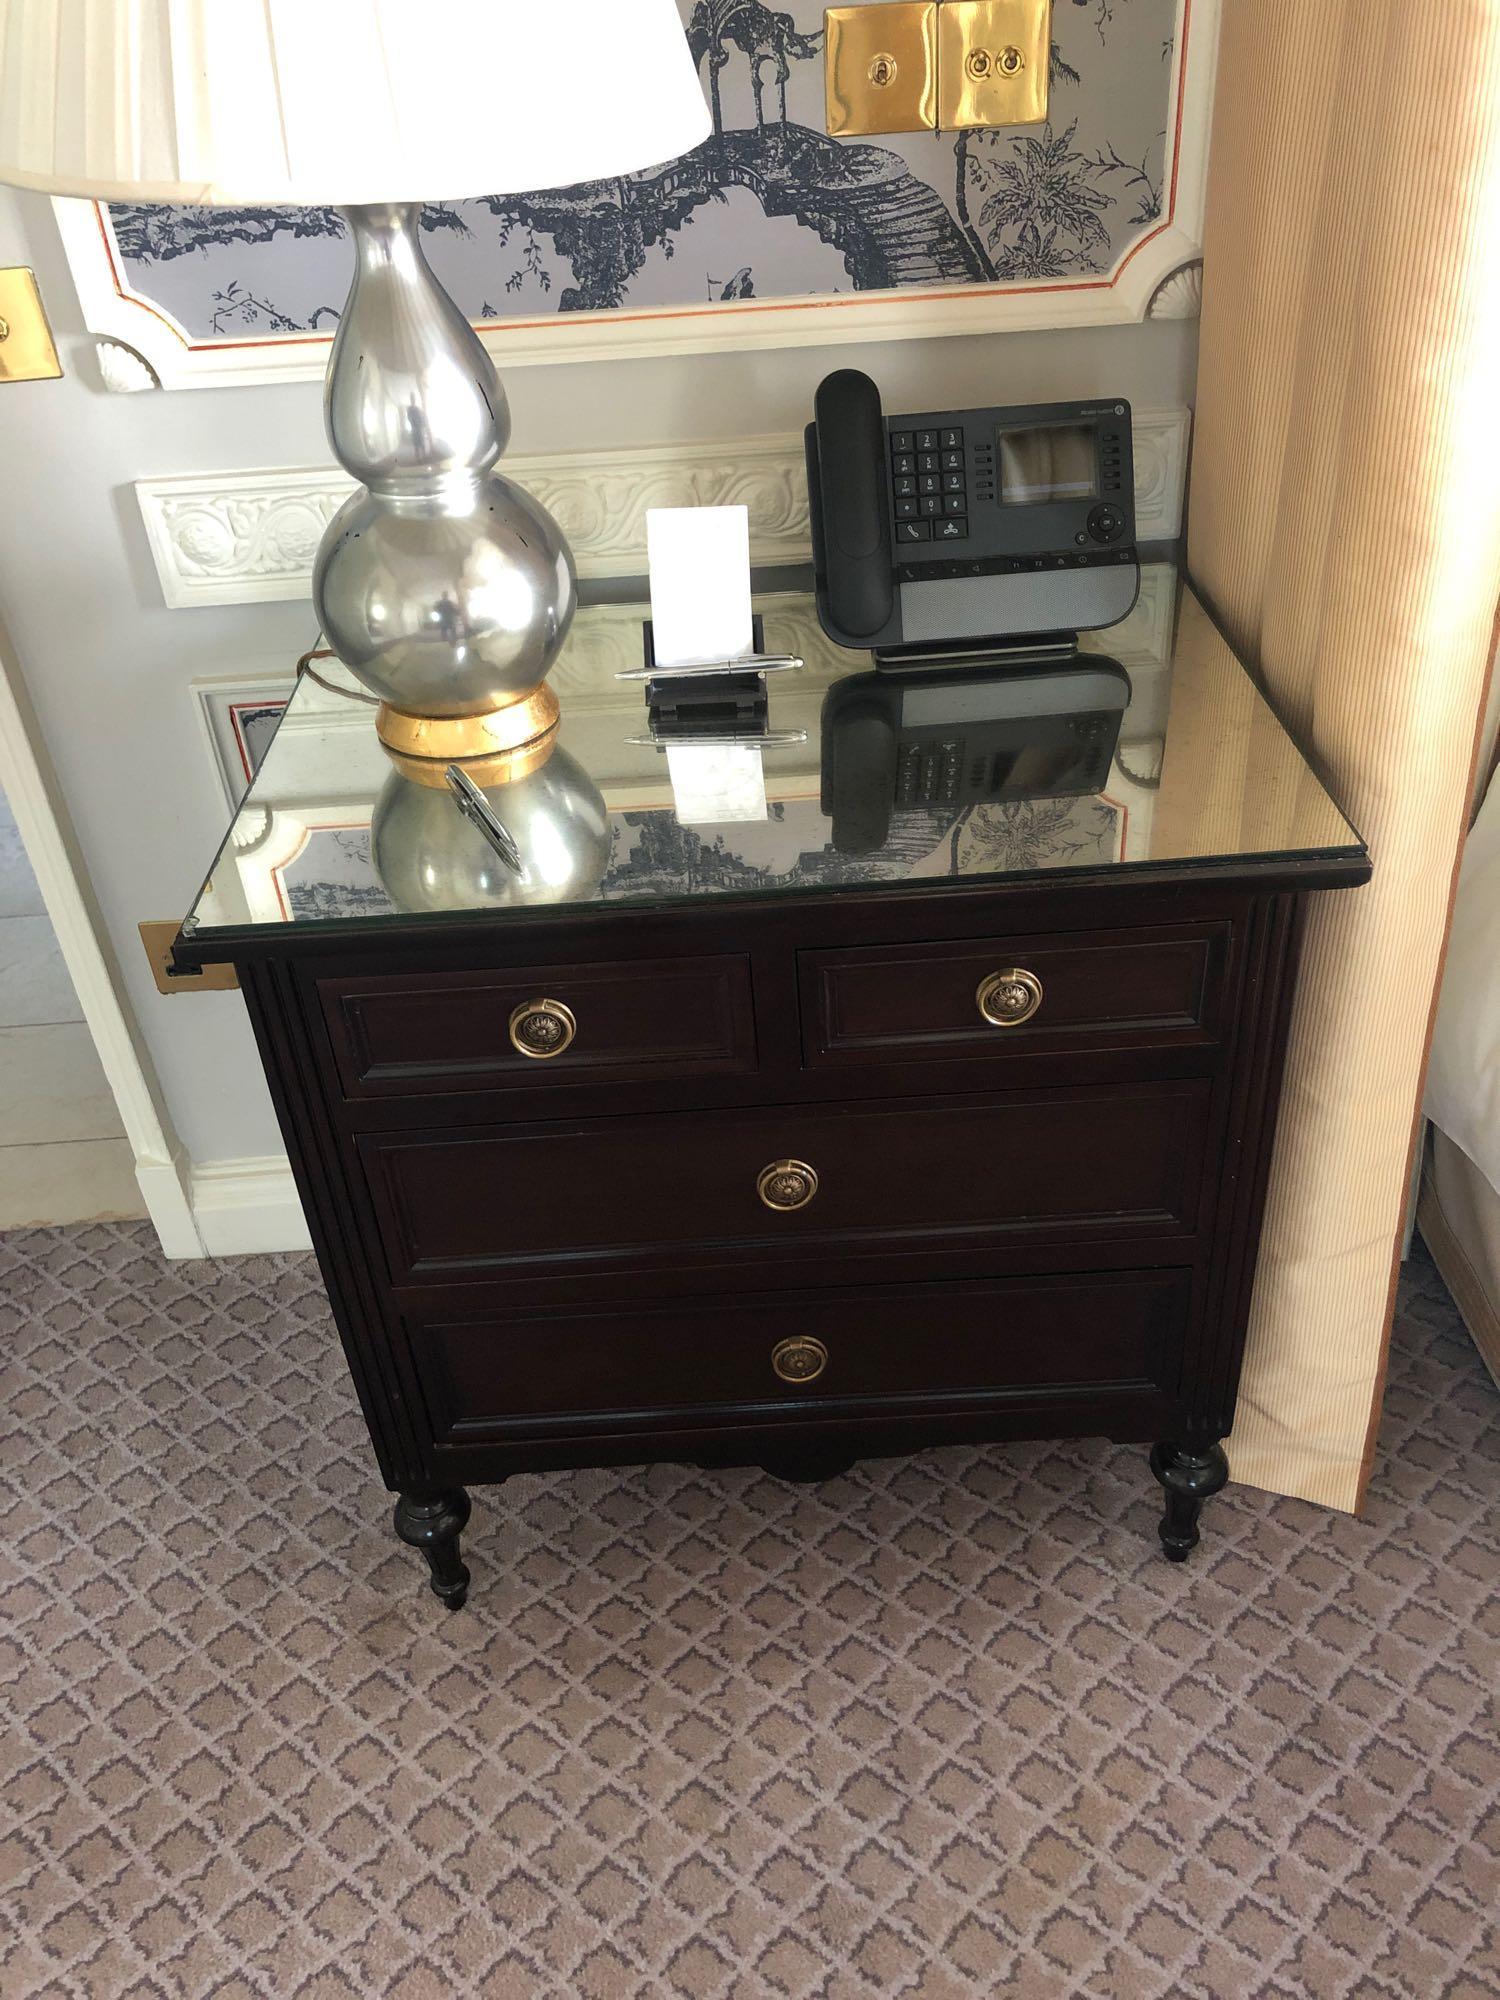 A Pair Four Drawer Mirrored Top Commode Chests Raised By Four Block Feet With A Square Carved